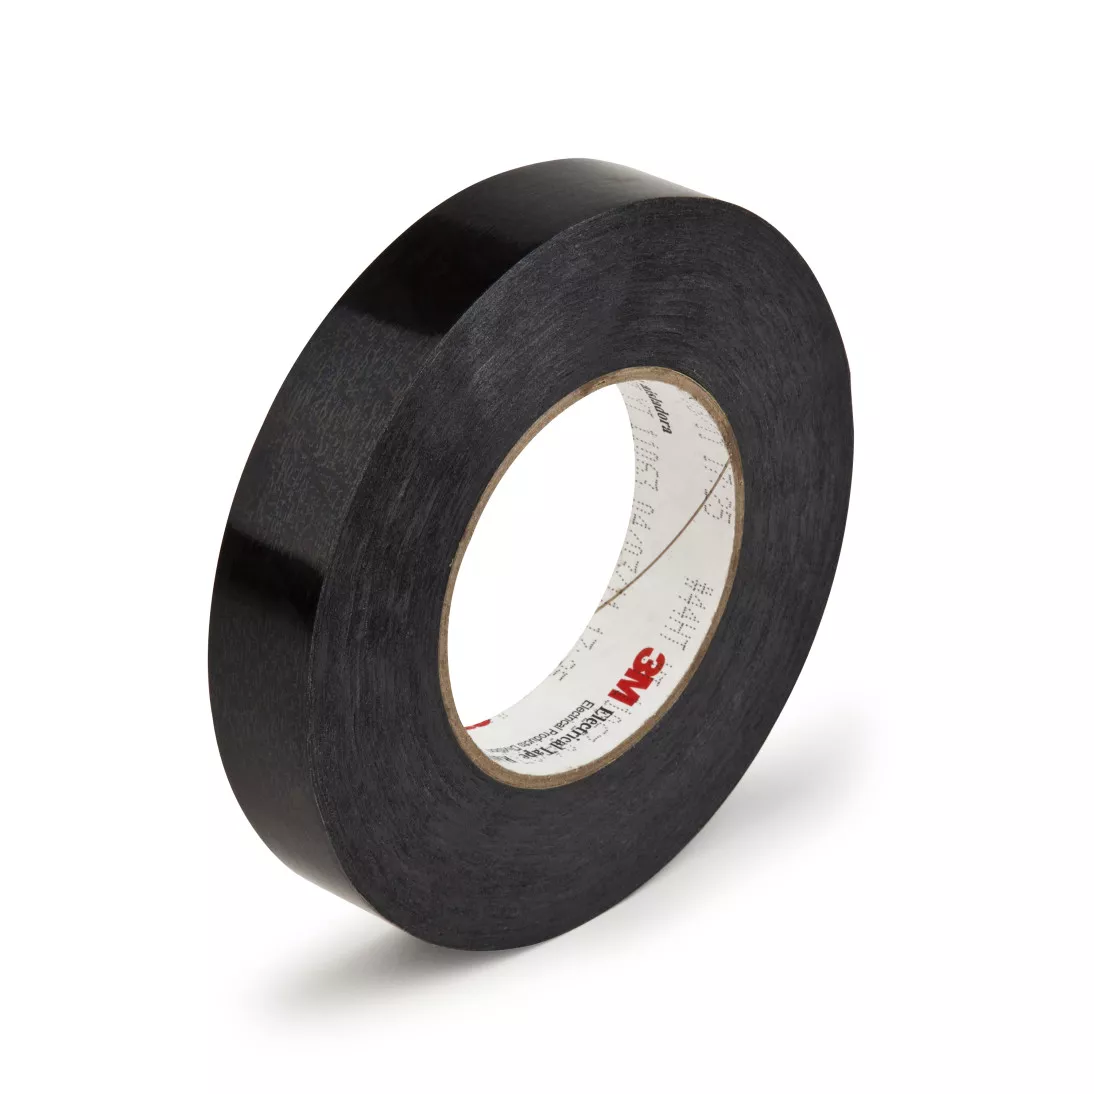 3M™ Composite Film Electrical Tape 44HT, 23.5 in x 90 yd, plastic core,
1 Roll/Case